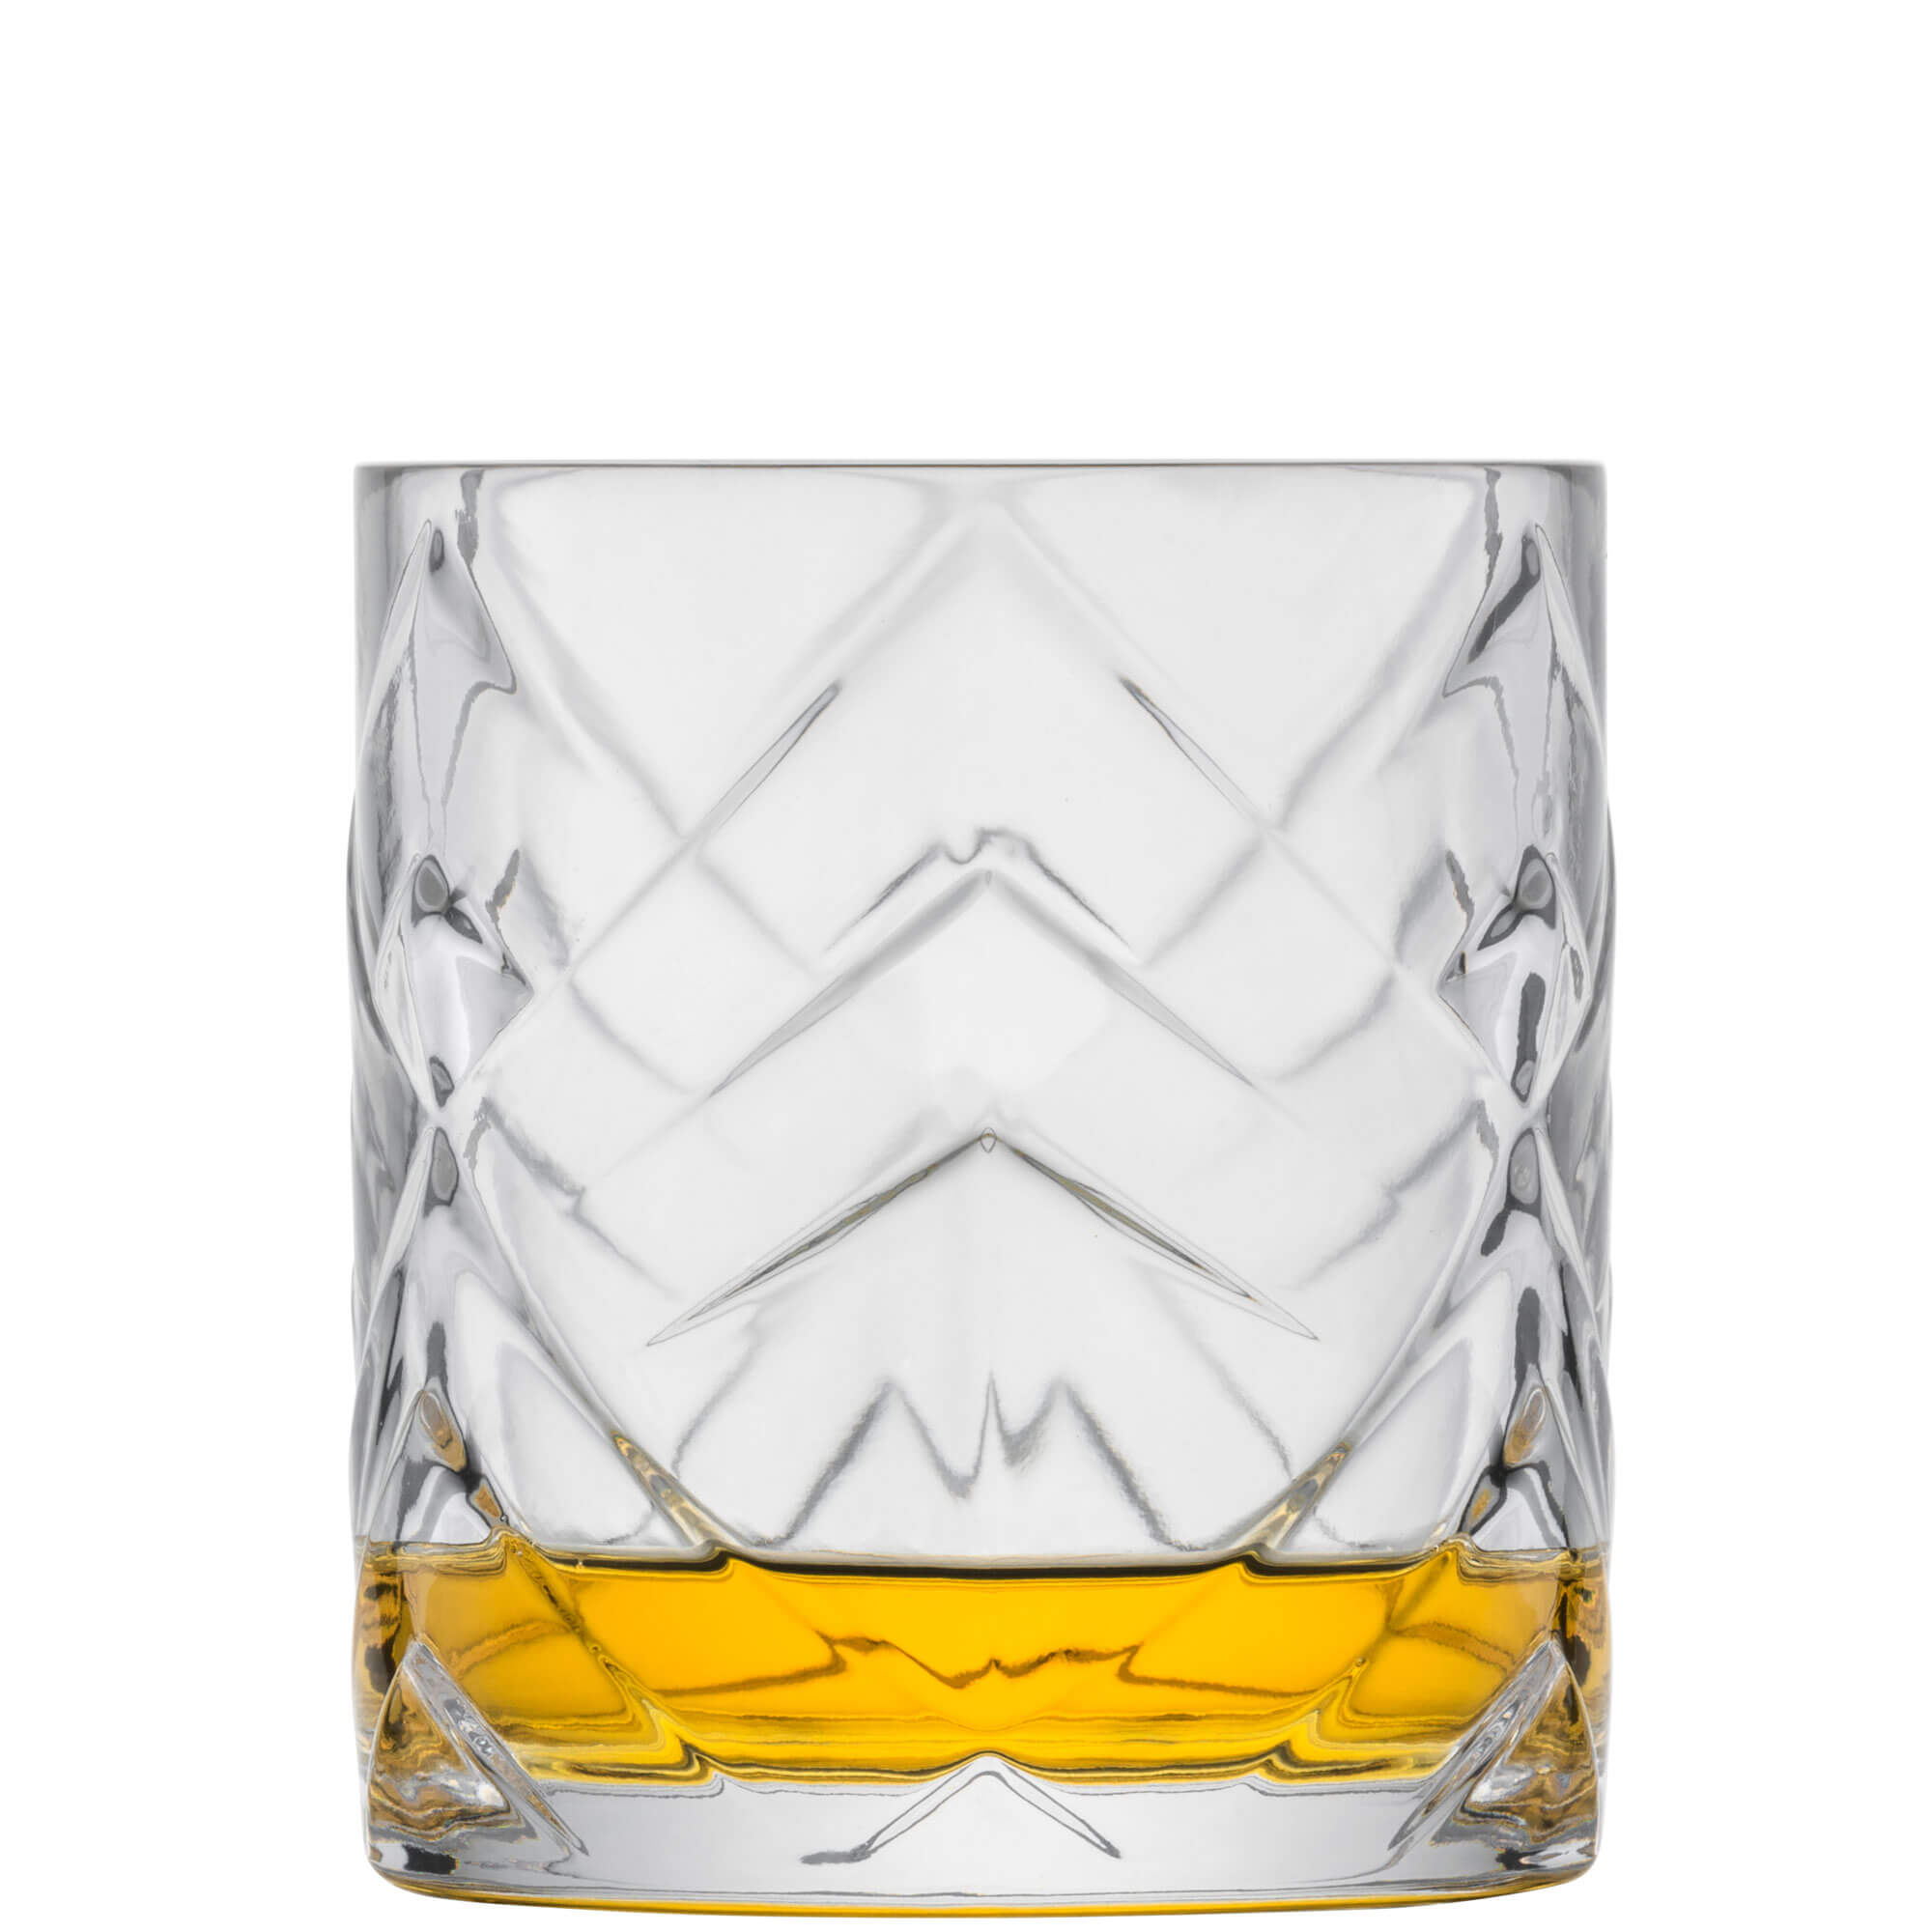 Whisky glass Fascination, Zwiesel Glas - 343ml (1 pc.)